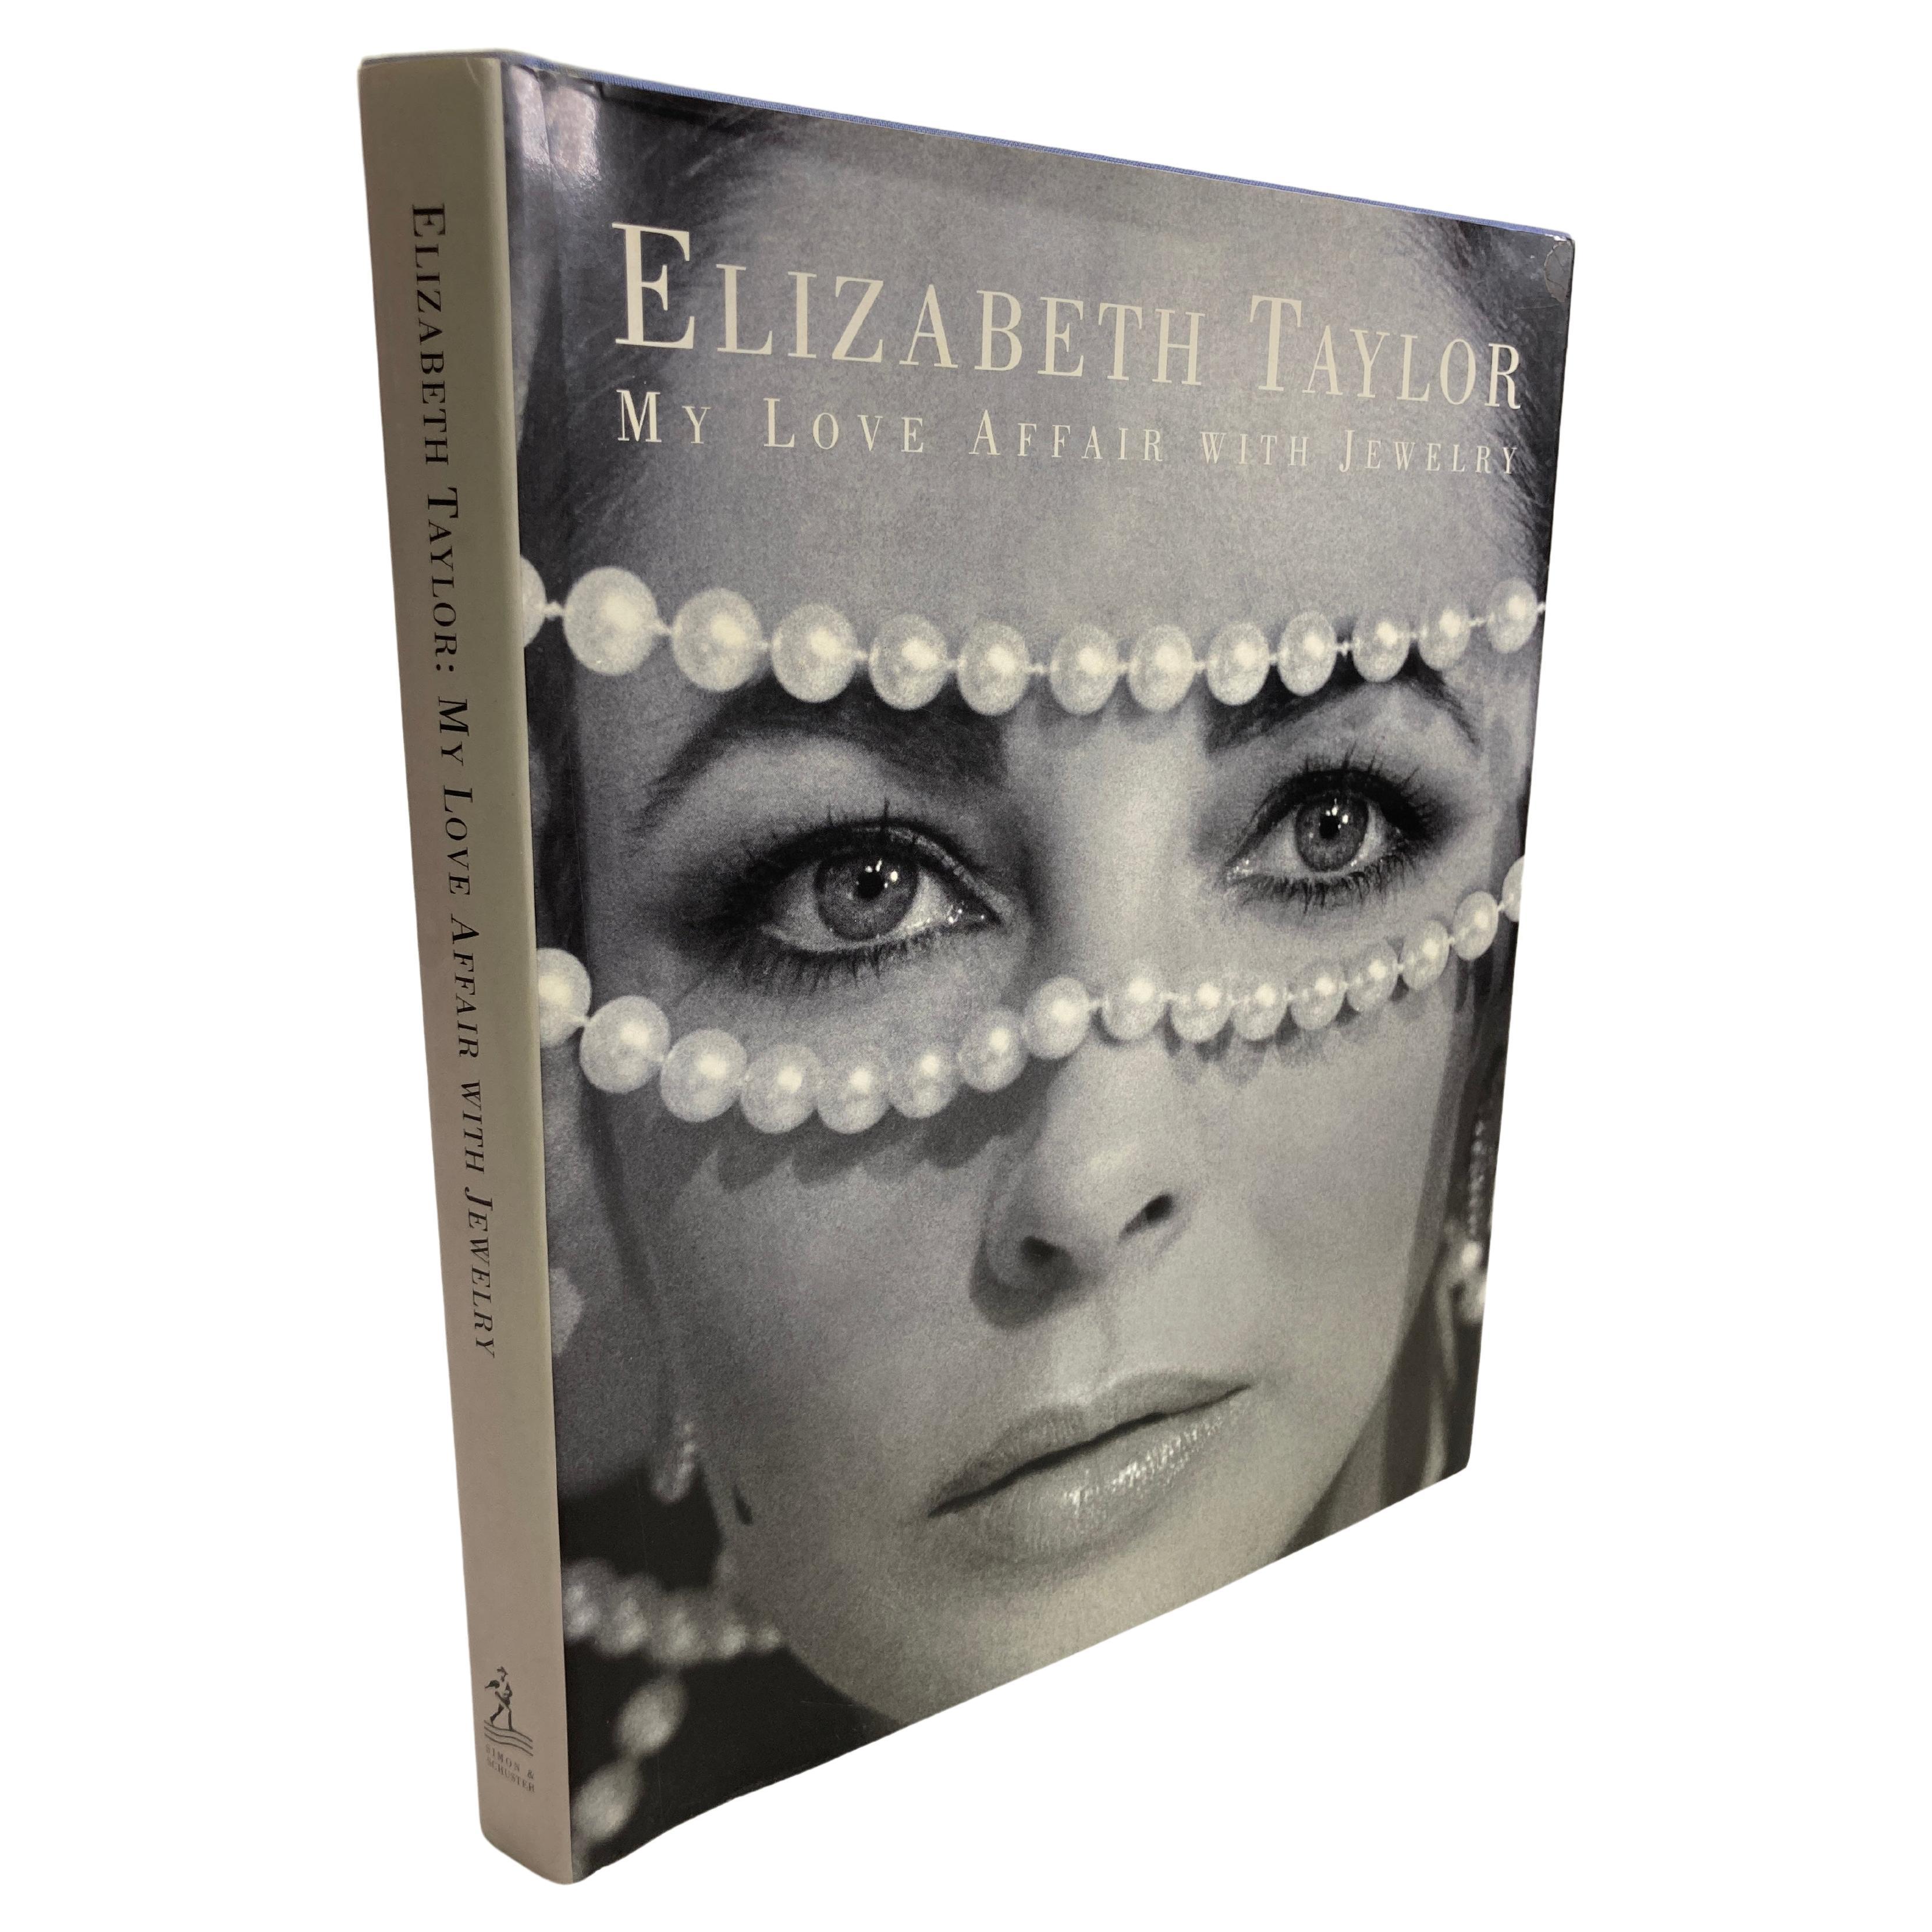  Elizabeth Taylor: My Love Affair With Jewelry 1st Edition Hardcover Book